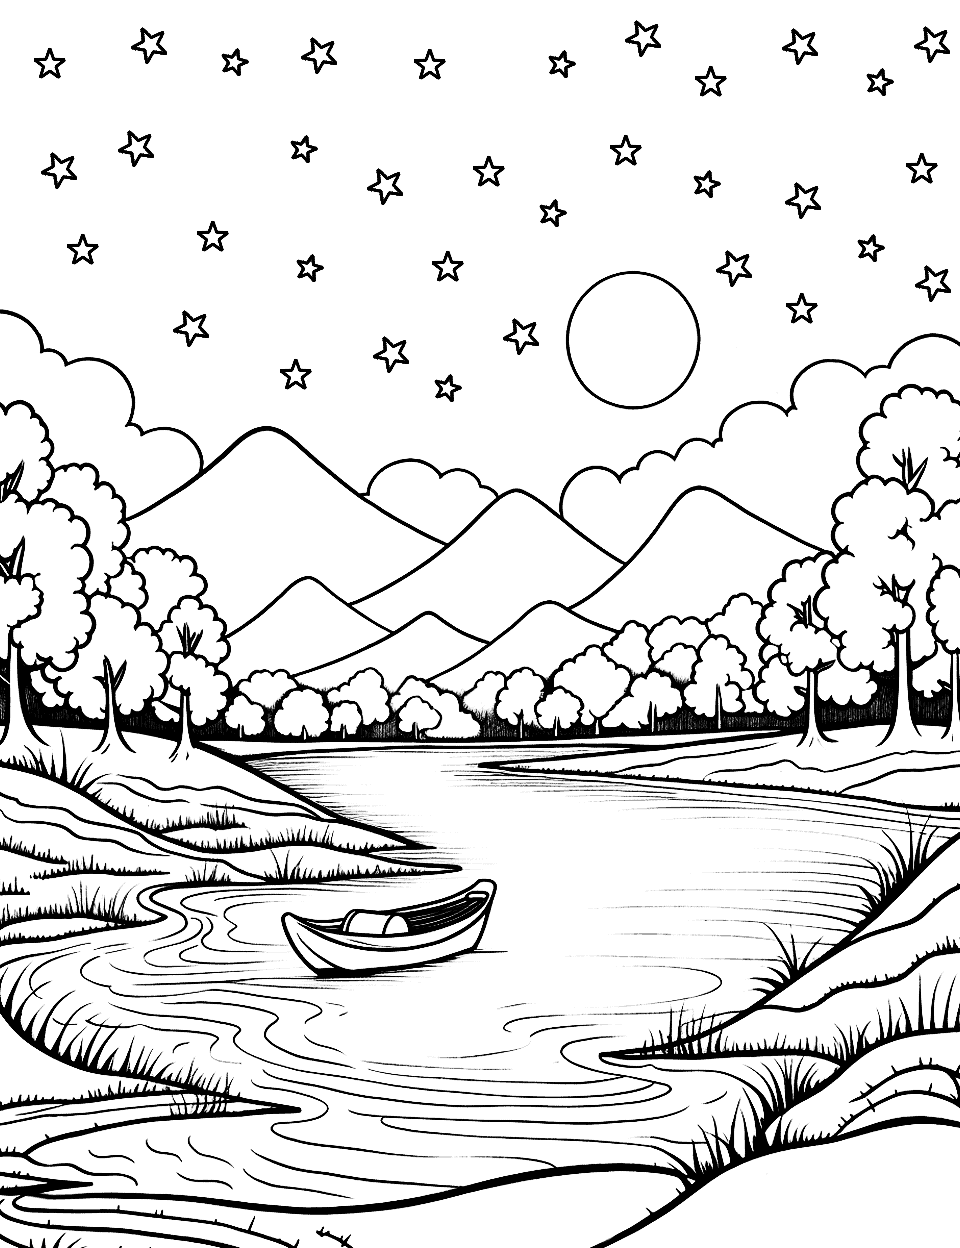 Moonlit River Canoe Coloring Page - A canoe floating down a gentle river under a starry sky with a full moon.